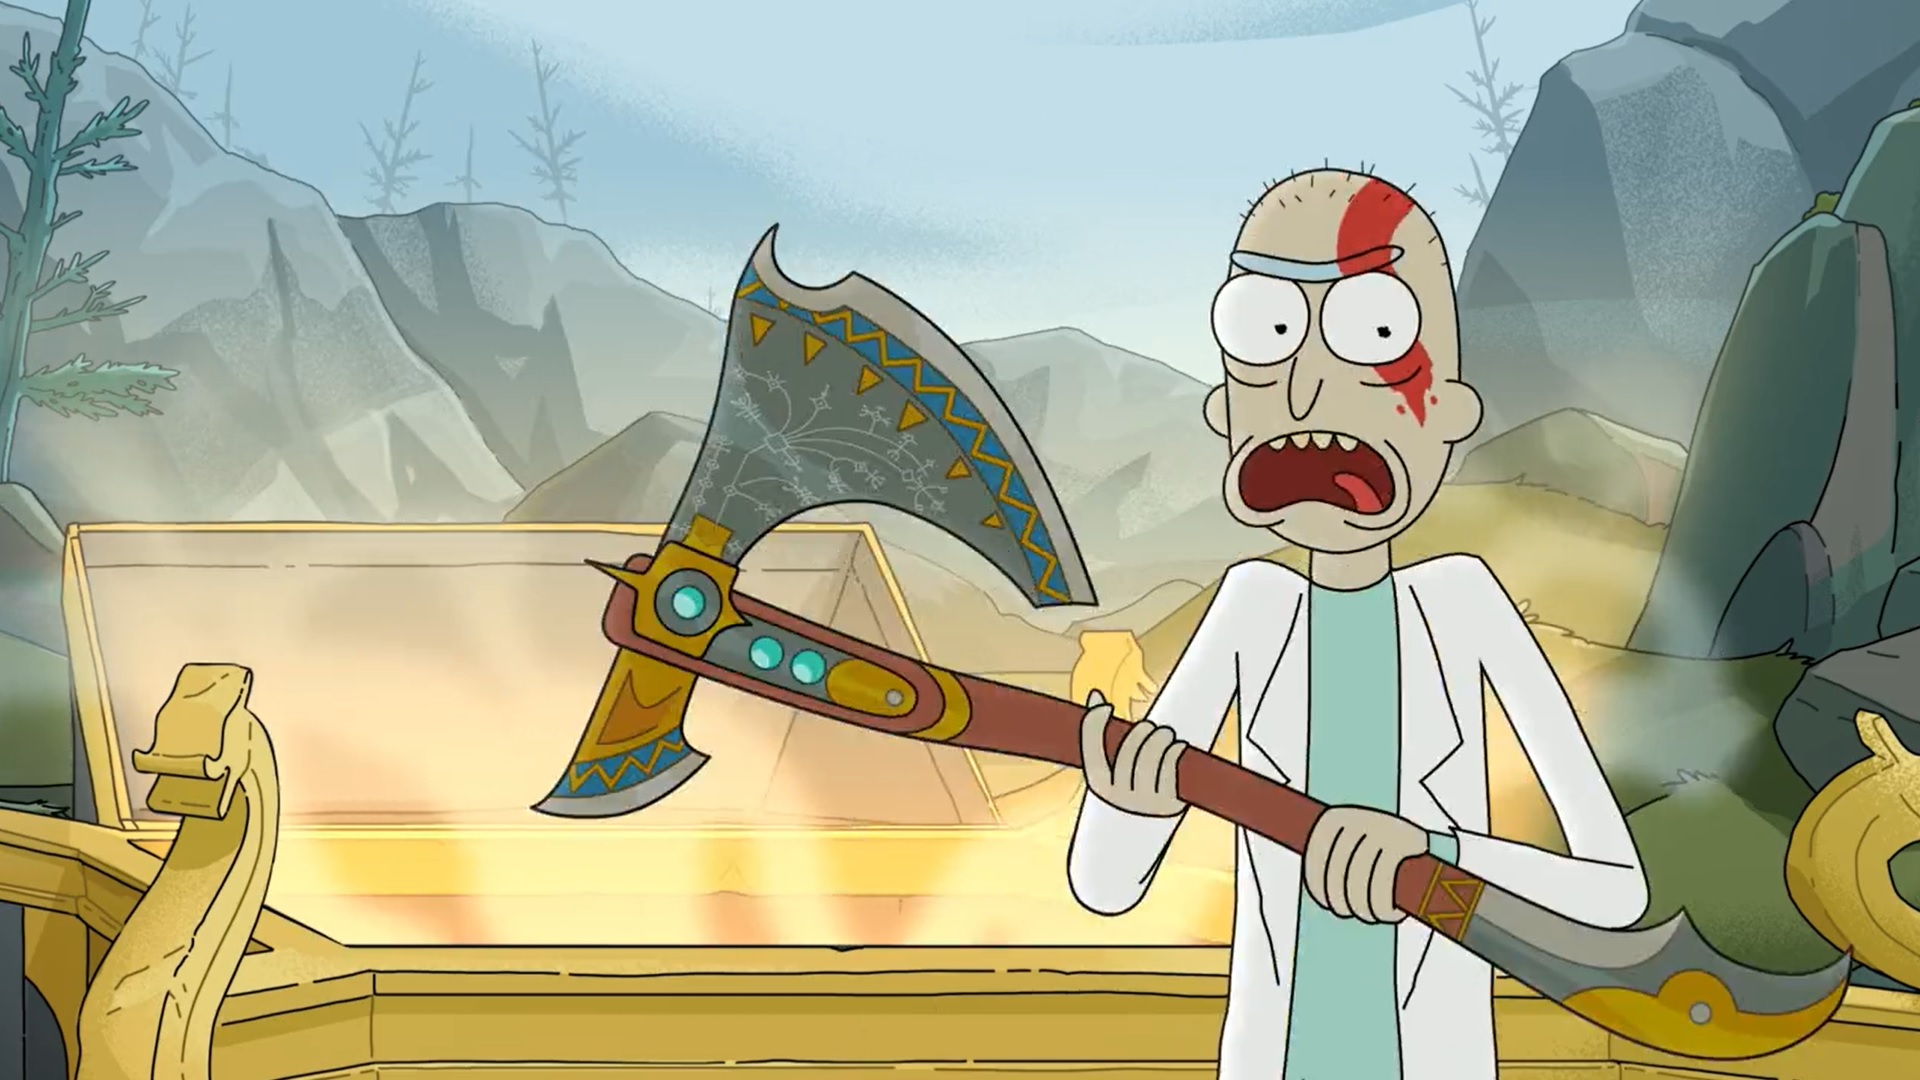 Rick and Morty meets God of War Ragnarok in this New Trailer